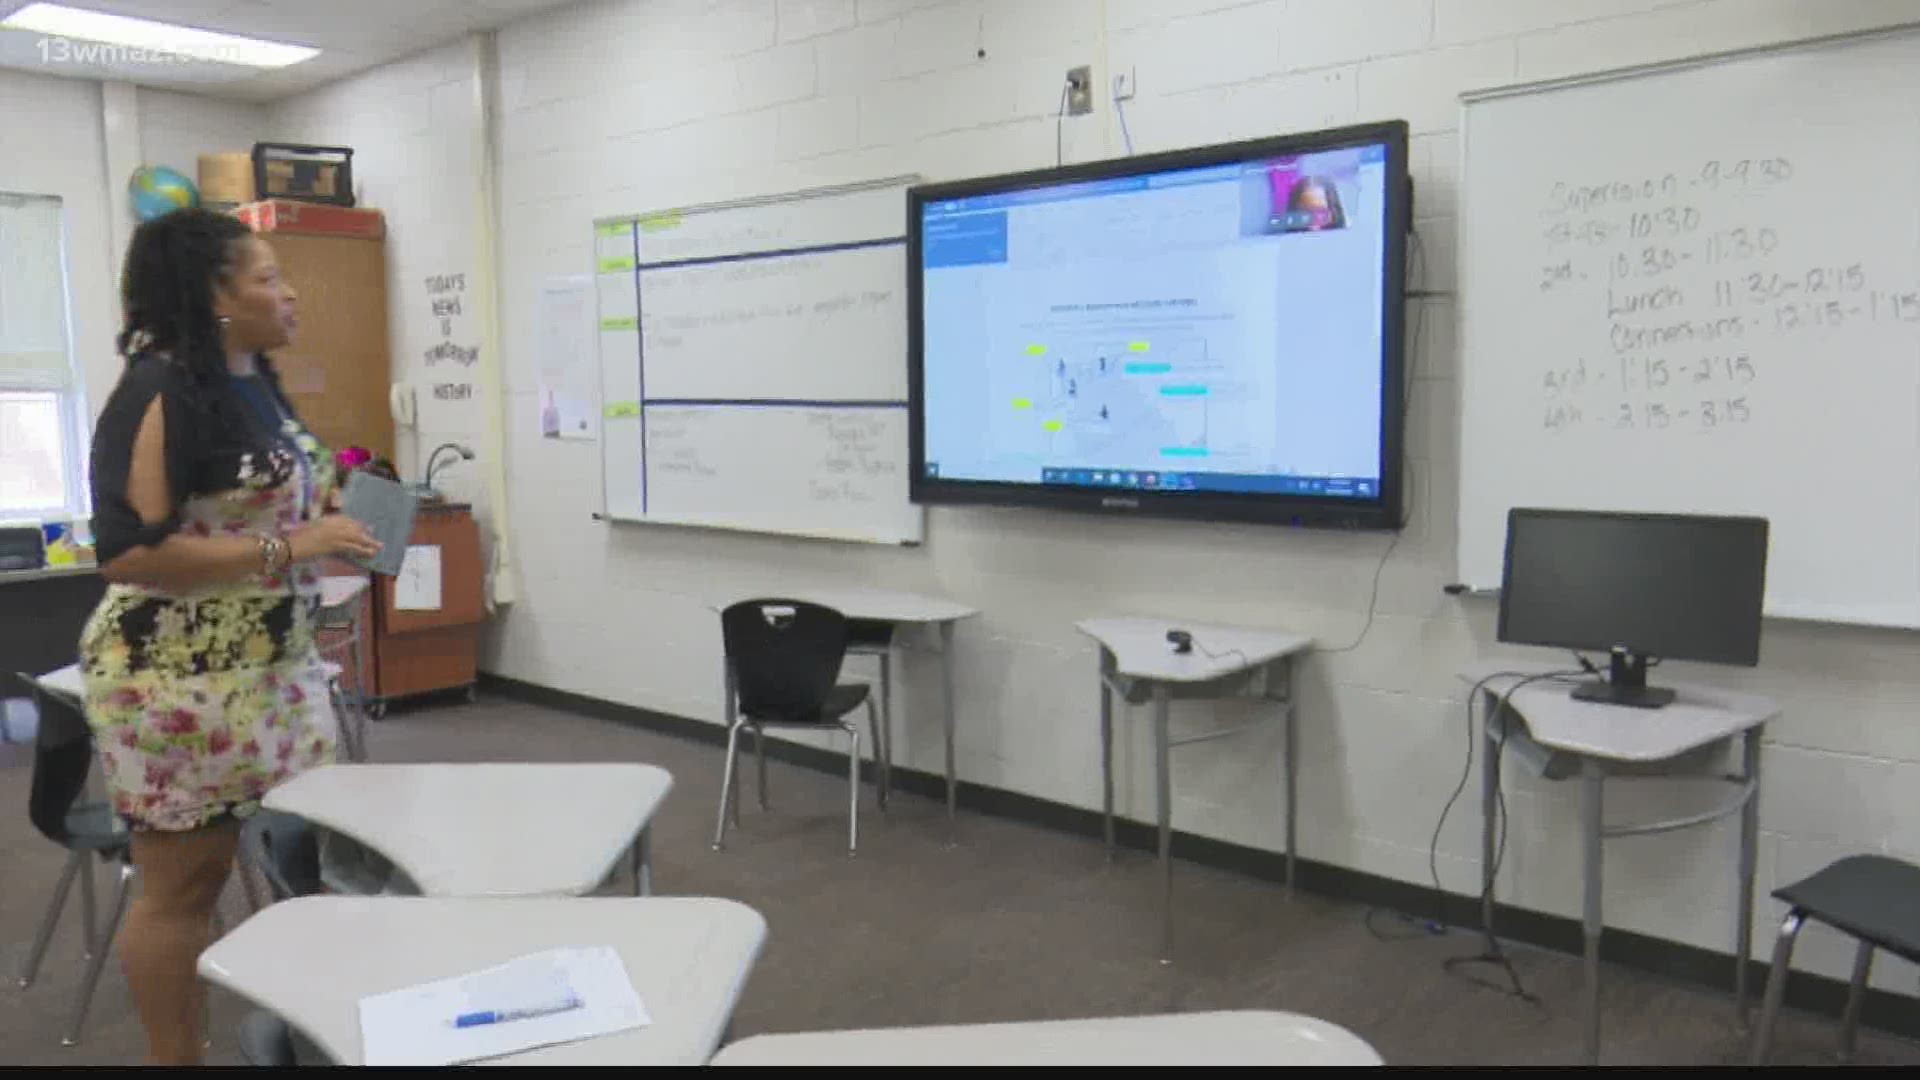 The school district made the decision to start the school year online as COVID-19 cases continued to rise in Bibb County